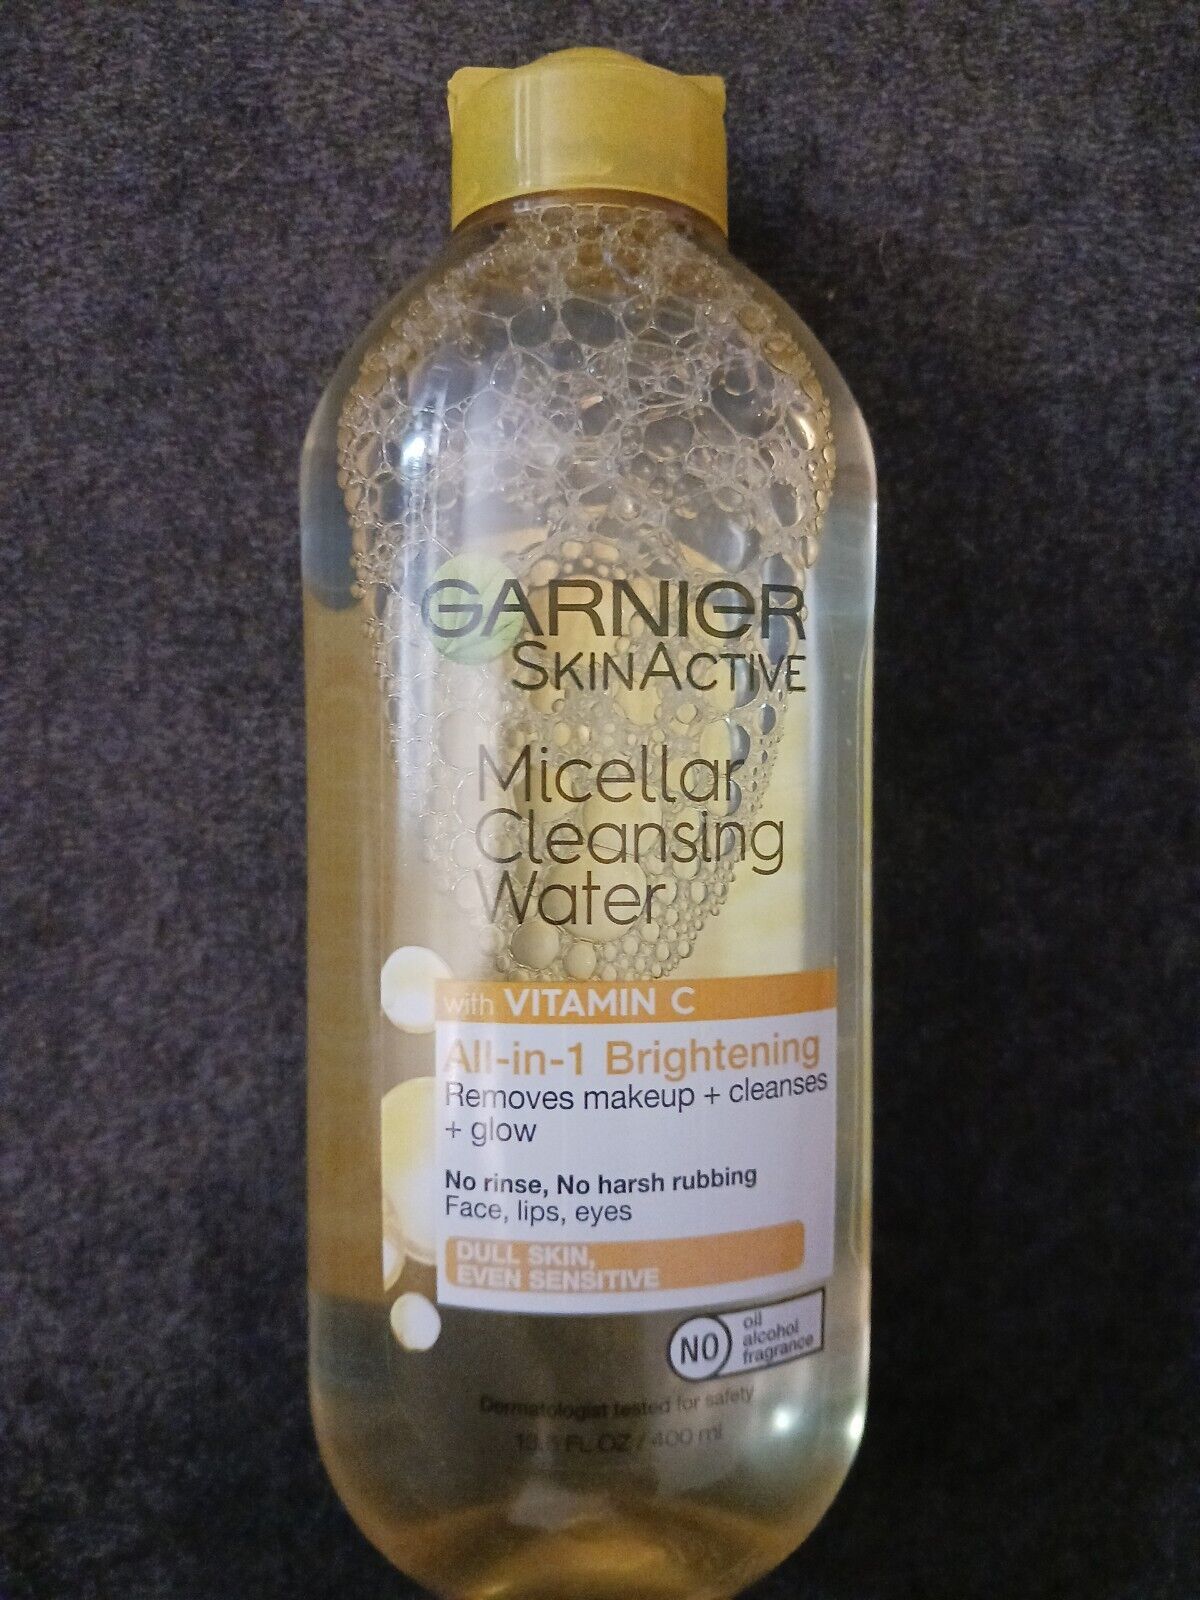 Primary image for Garnier SkinActive Micellar Cleansing Water with Vitamin C, 13.5 Fl Oz (G9)